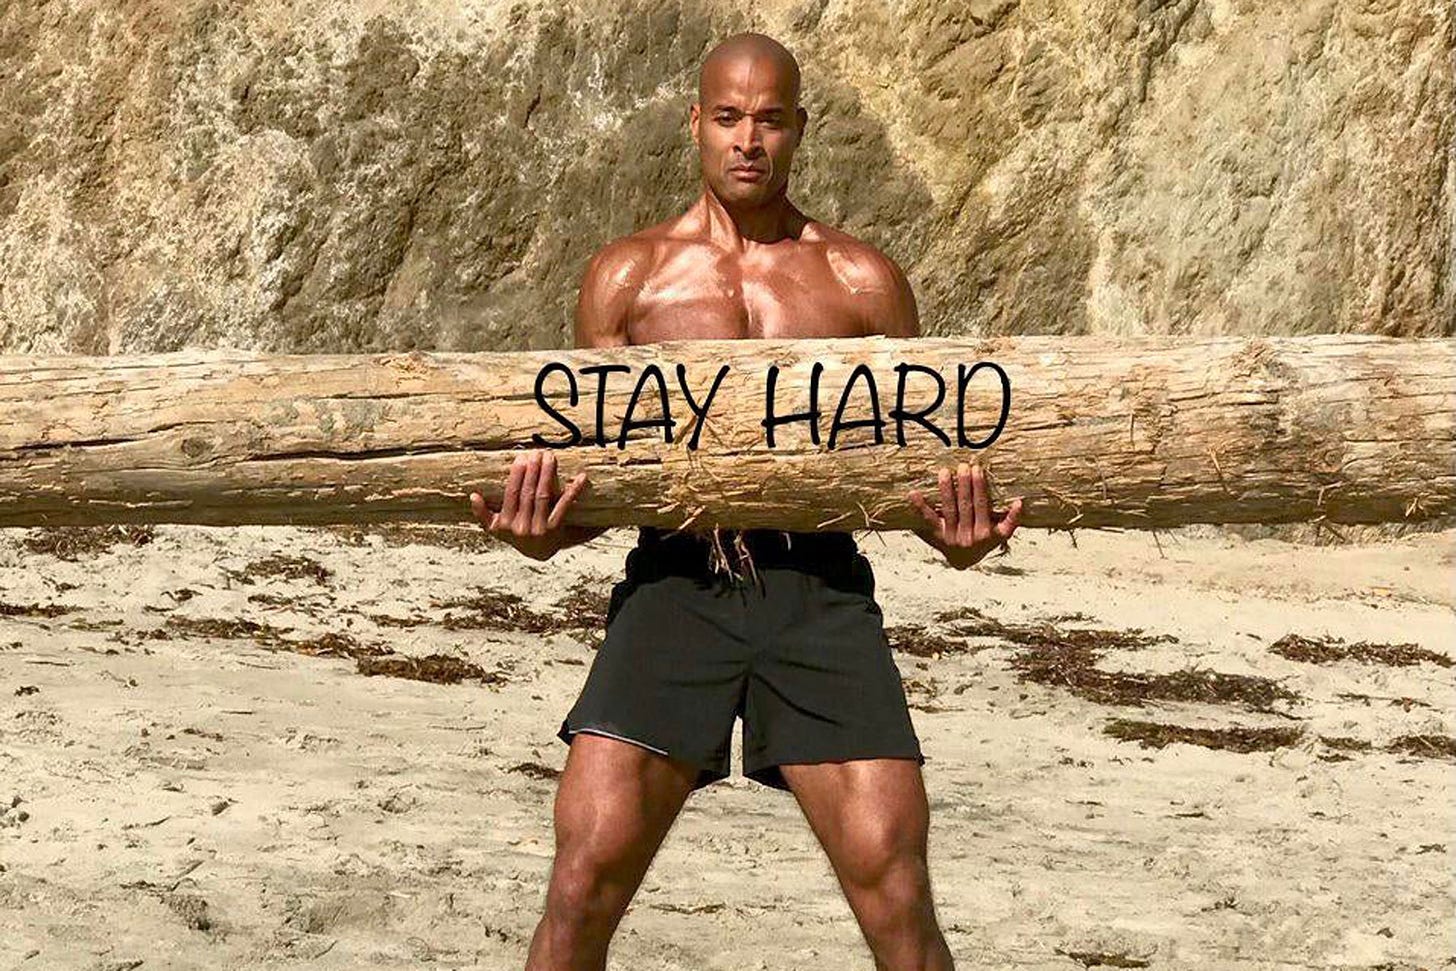 I Tried David Goggins' Craziest Fitness Advice. It Actually Worked